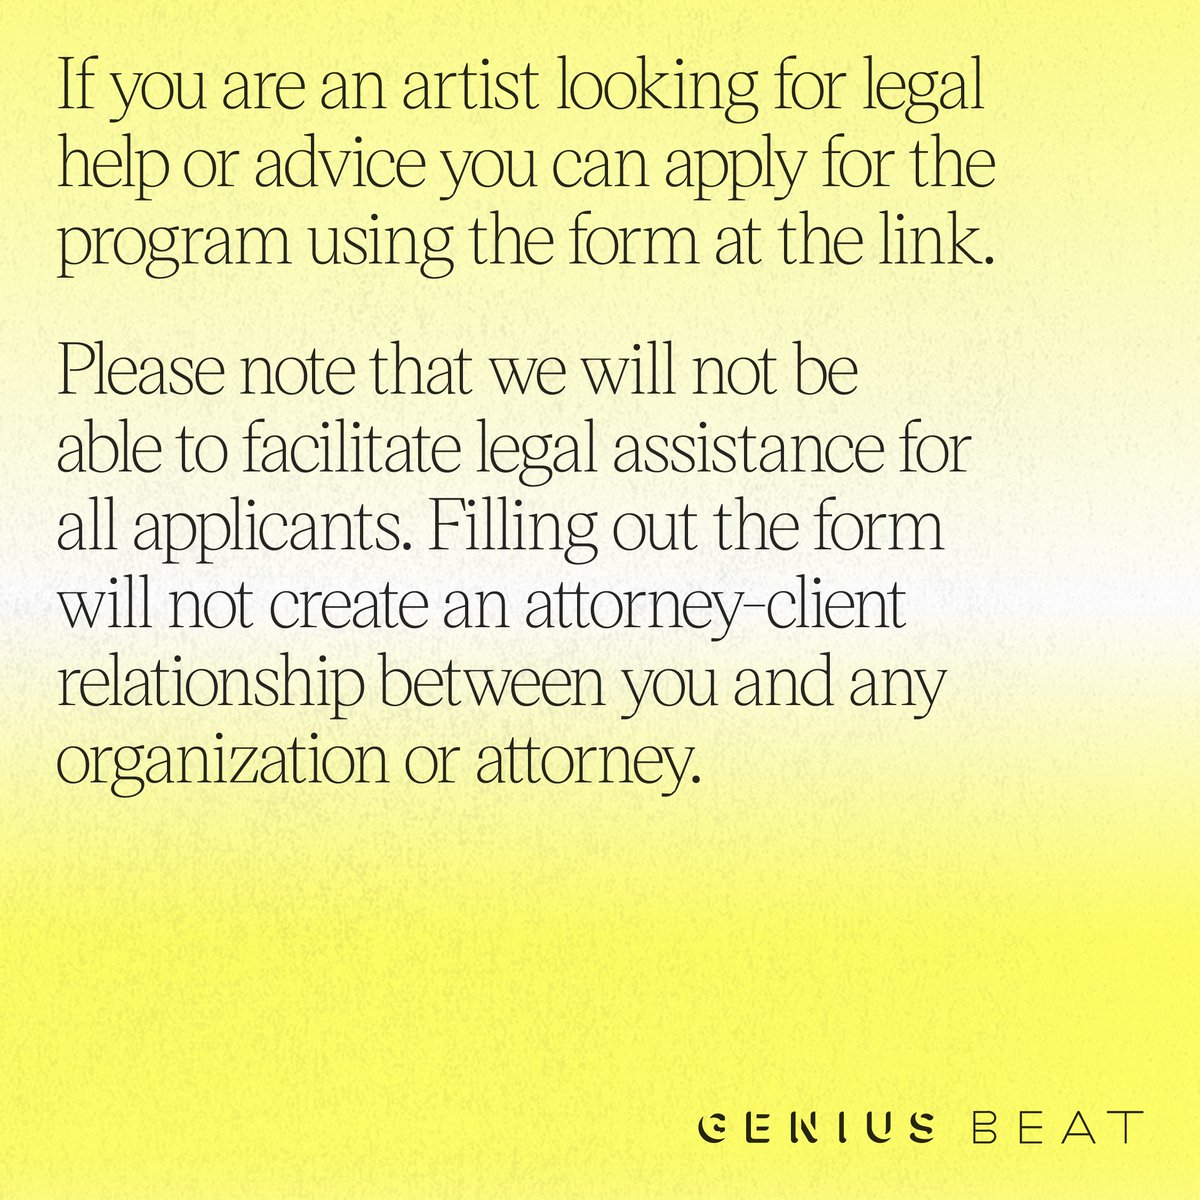 we're offering access to potential legal services as part of the continuation of our #GeniusBEAT program

apply here: so.genius.com/WFpv4vu